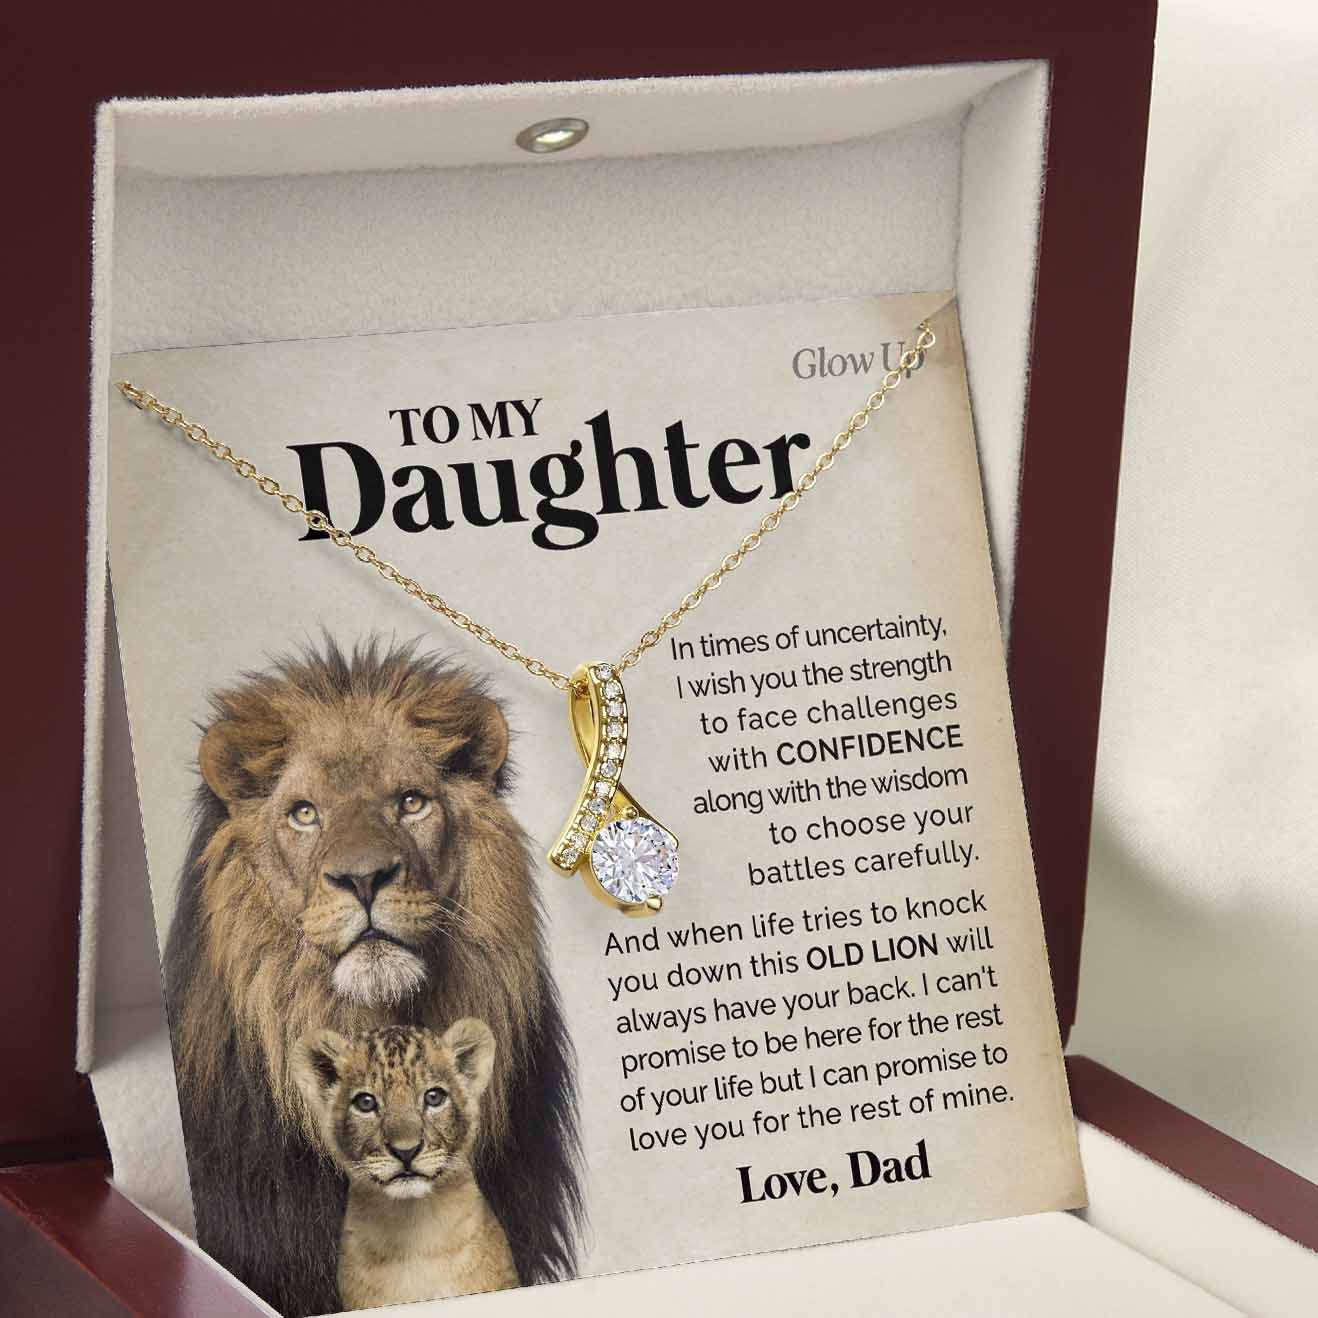 ShineOn Fulfillment Jewelry 18K Yellow Gold Finish / Luxury LED Box To my Daughter - Face challenges - Ribbon Necklace